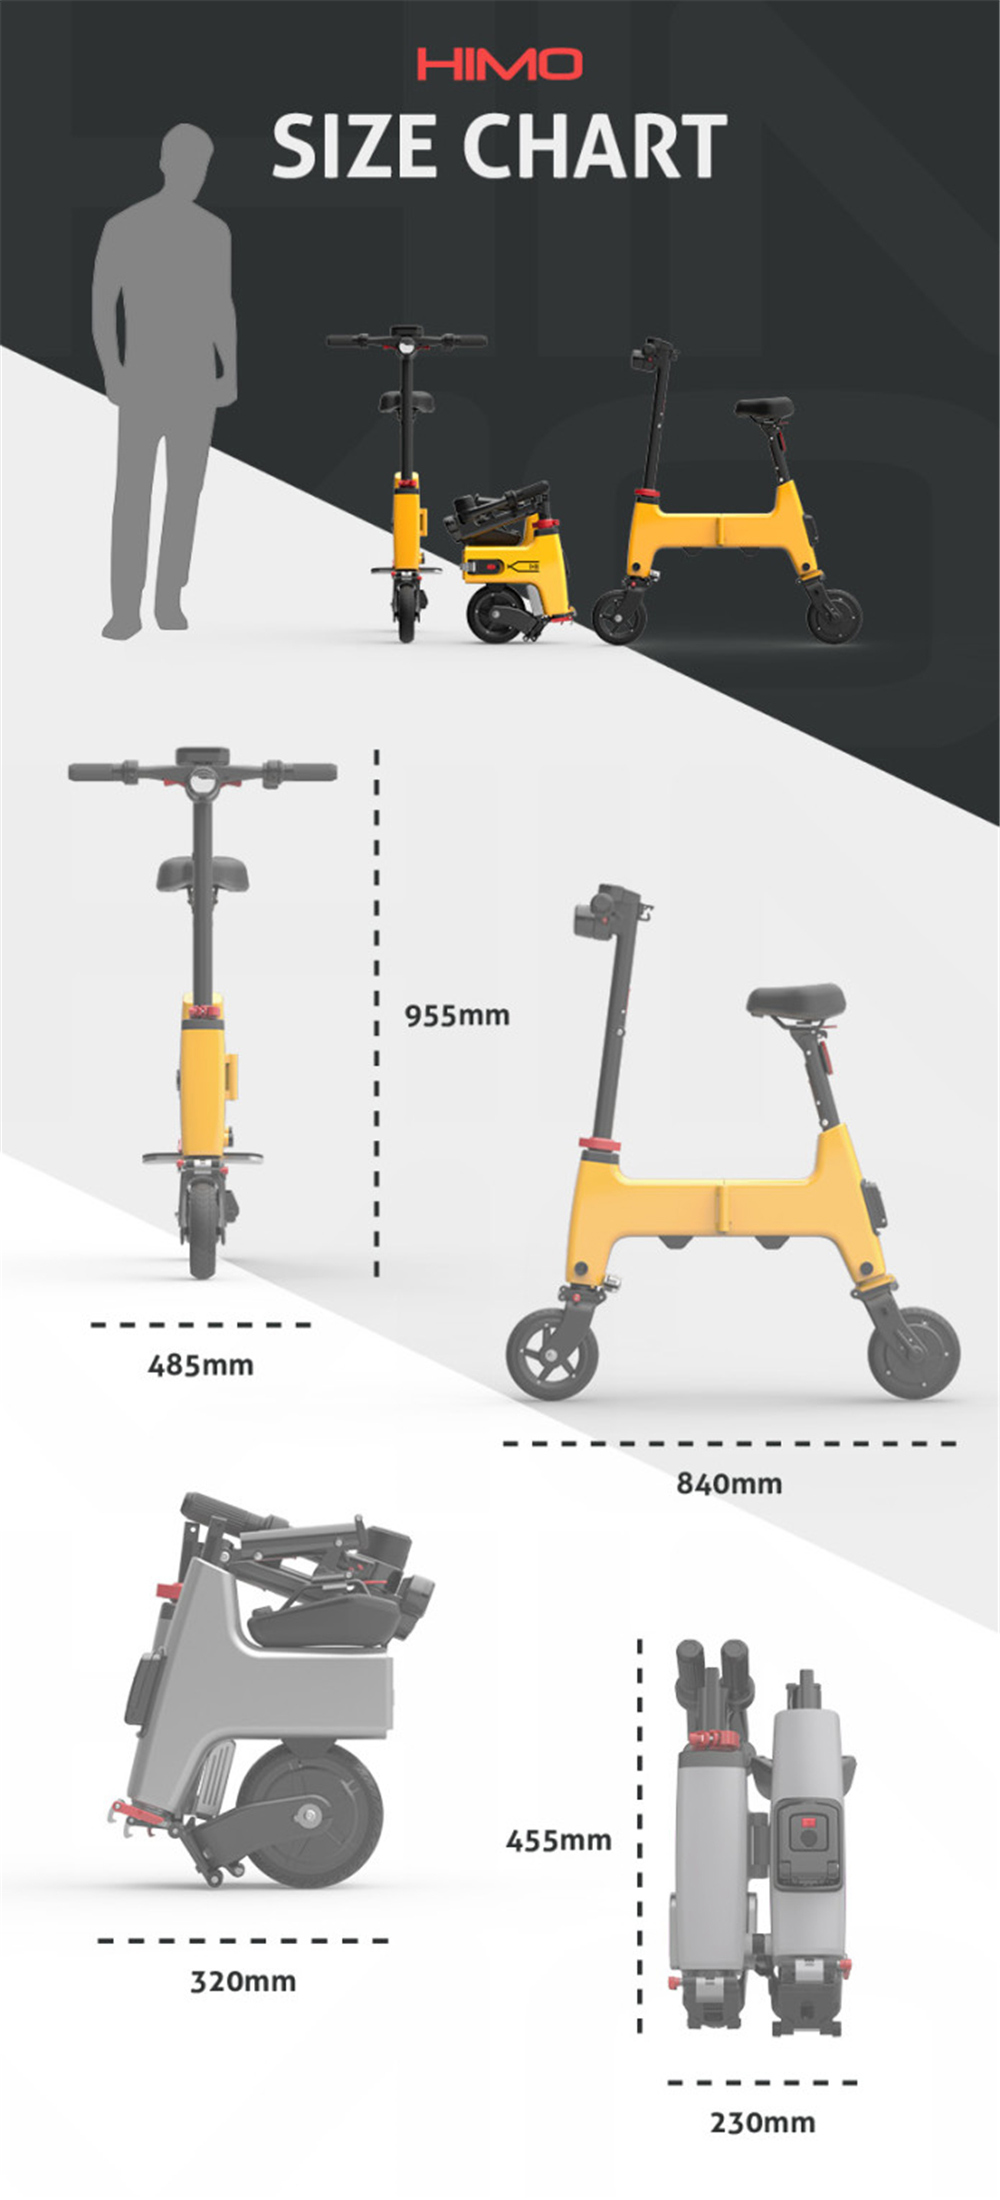 Xiaomi HIMO H1 Portable Folding Two-Wheel Electric Bicycle 20KM Endurance A3 Paper Size Safe And Comfort - Gray